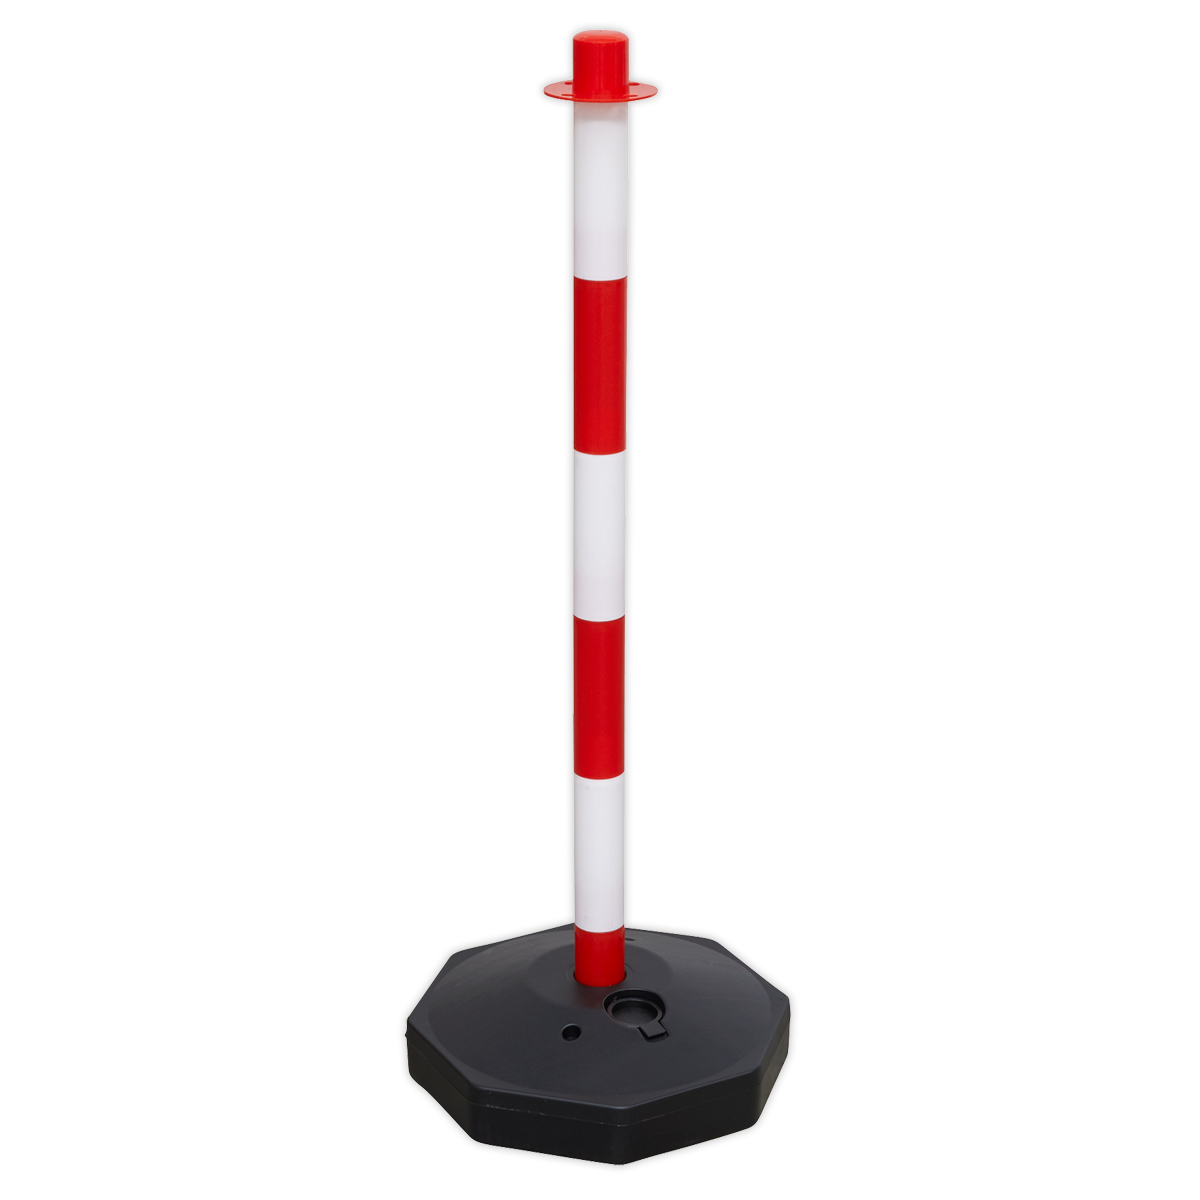 Red/White Post with Base - RWPB01 - Farming Parts